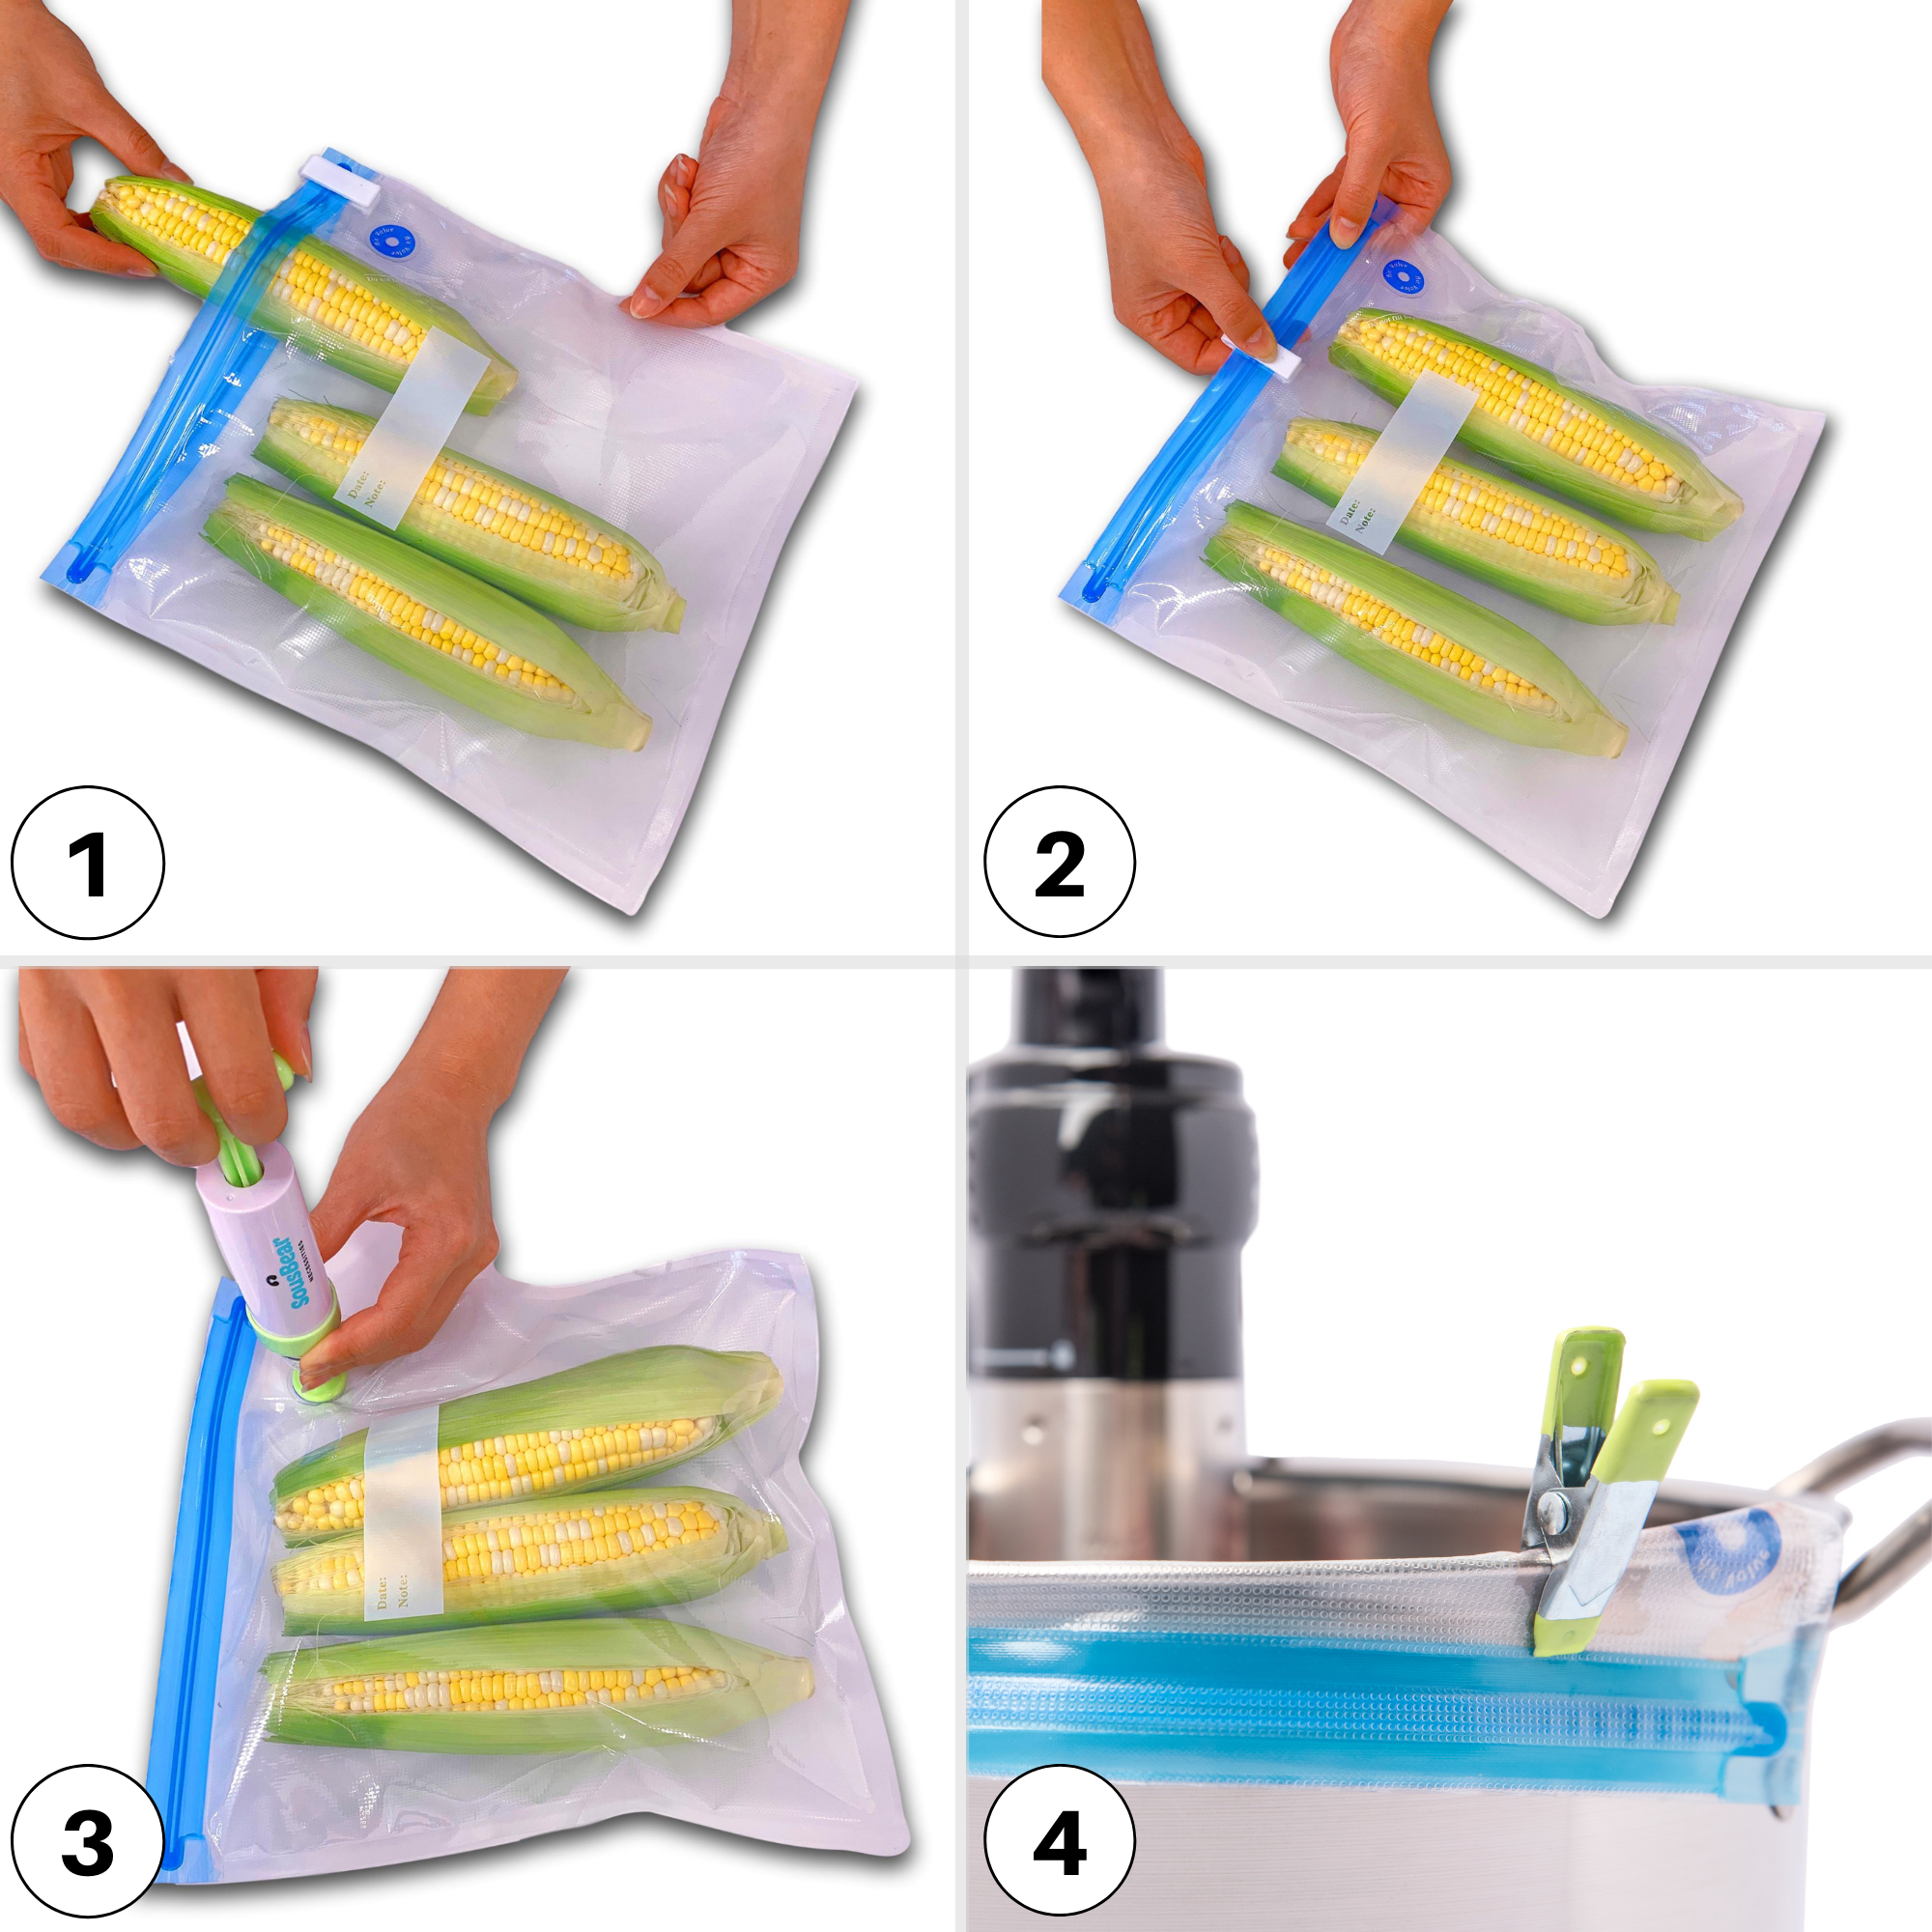 How to Vacuum Seal Bags